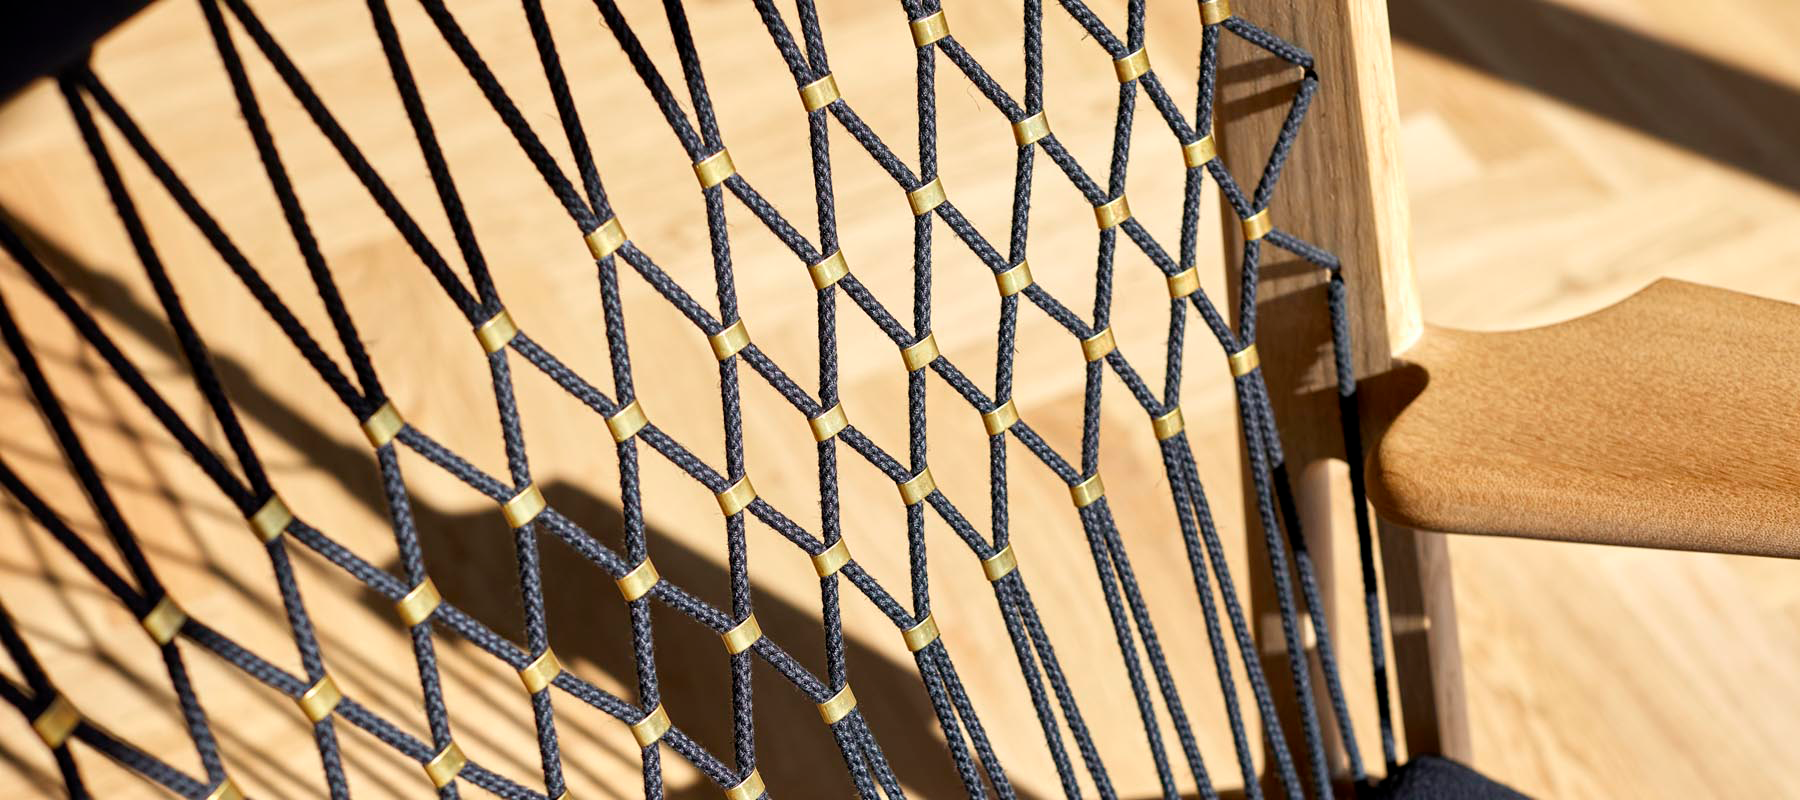 A black netted chair, with gold clasps holding the black netting together